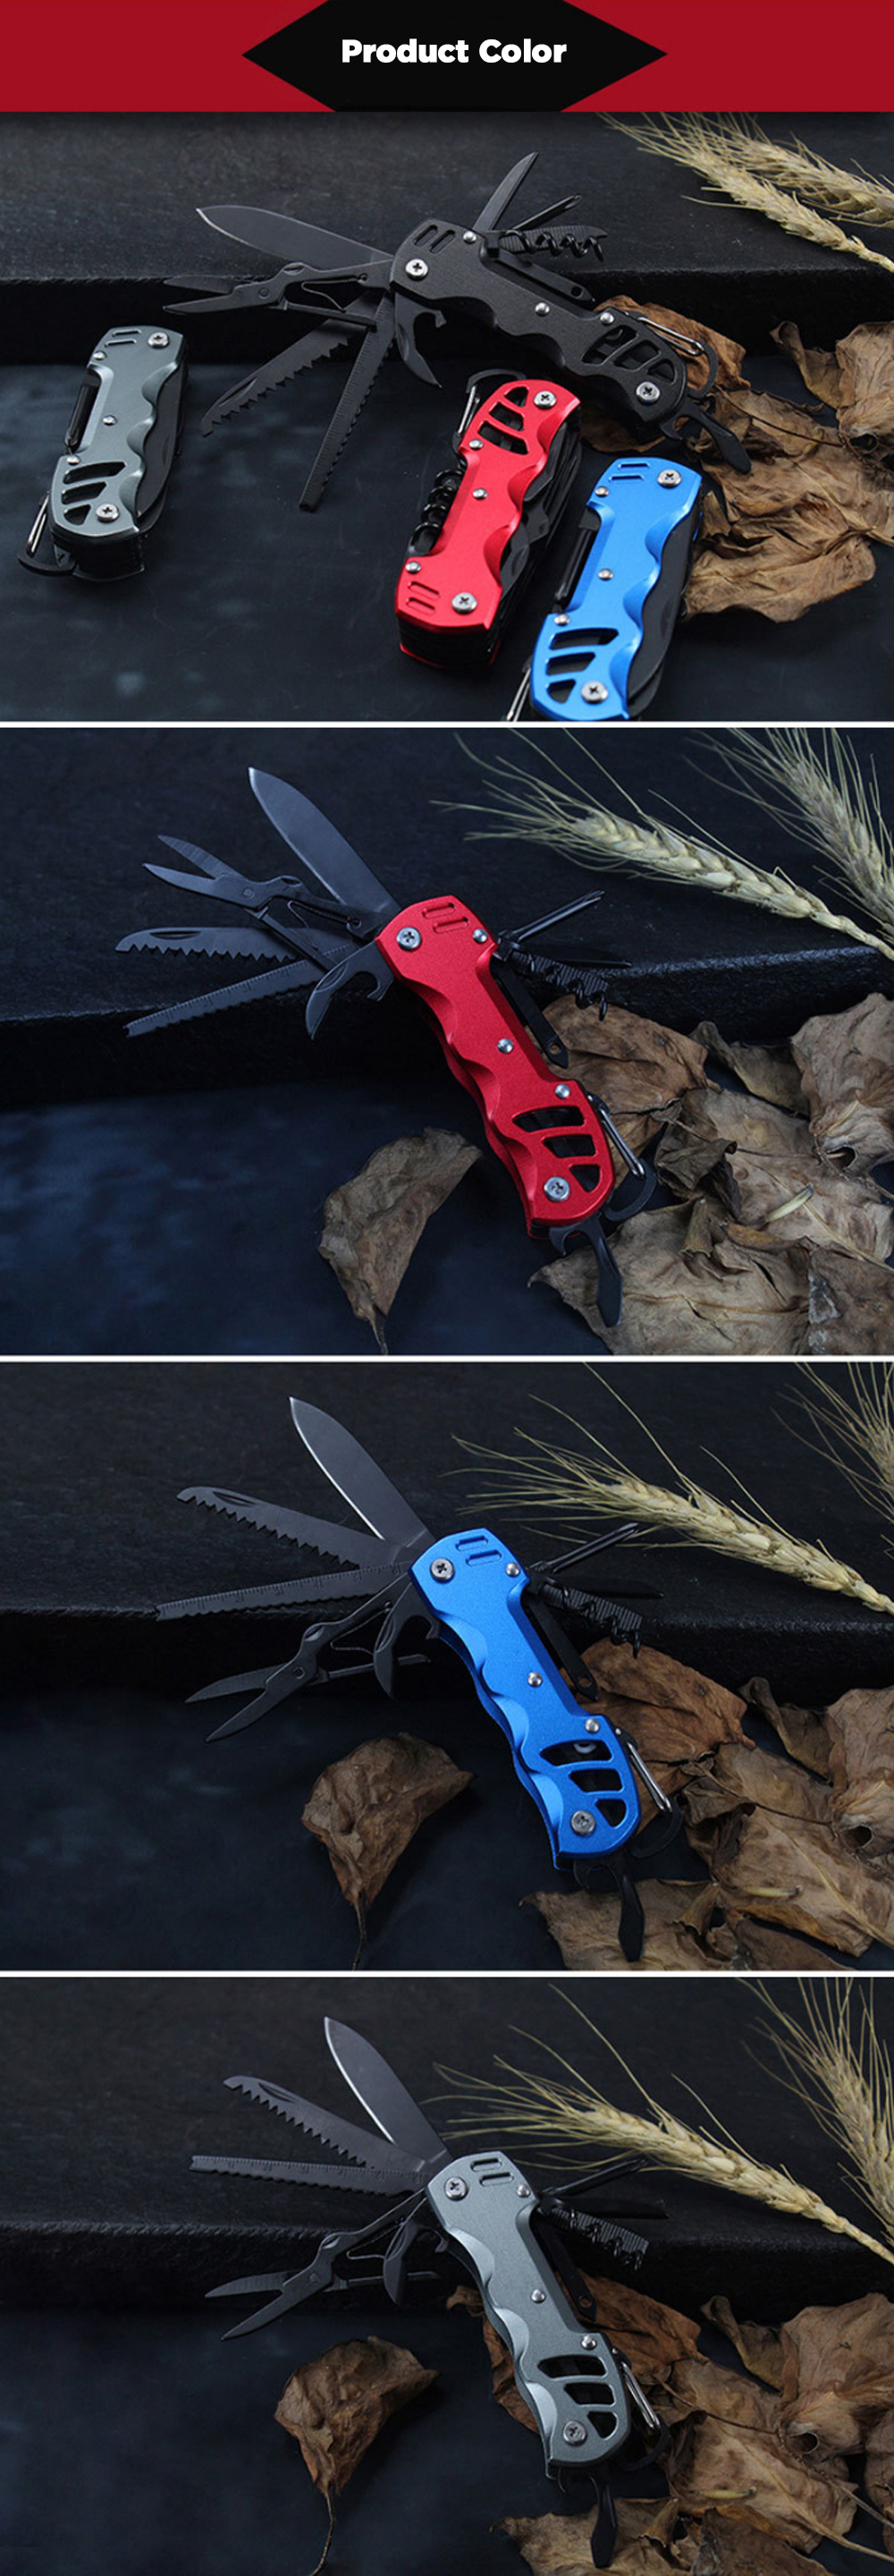 15-in-1-Multifunction-Folding-Knife-EDC-Survival-Tools-Saw-Scissors-Opener-Carabiner-Screwdriver-Out-1739966-4